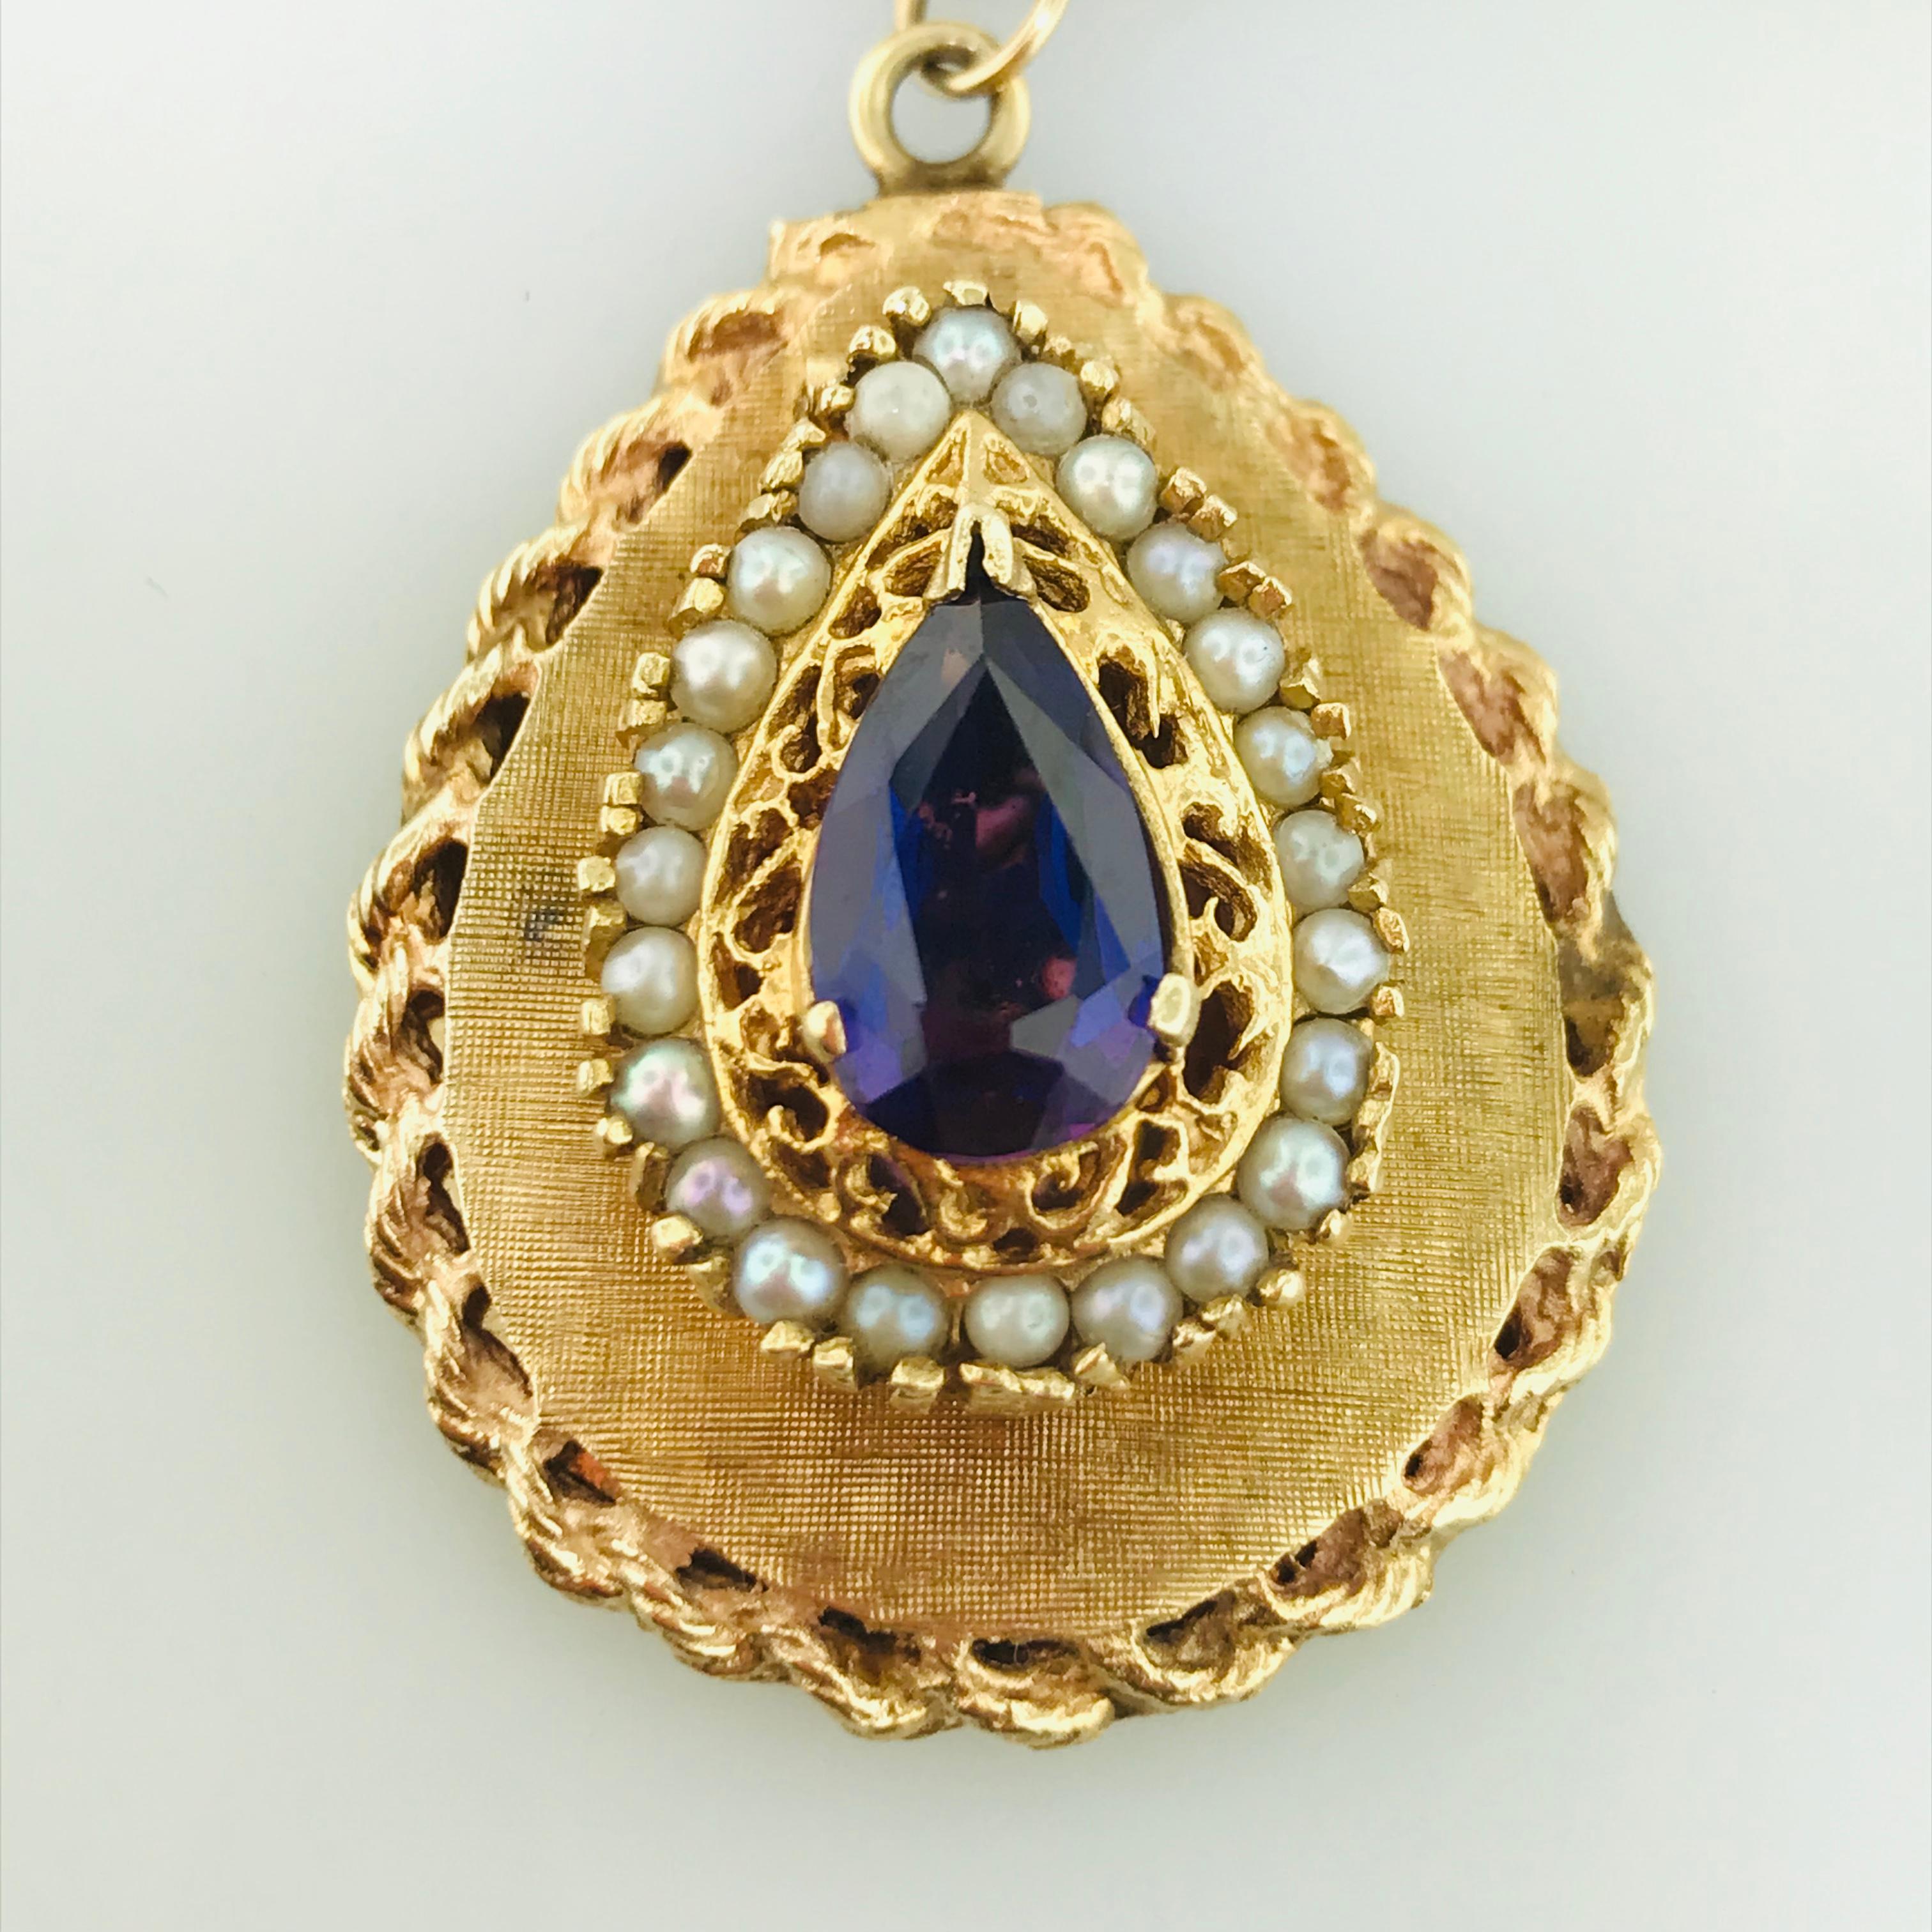 Estate Vintage Locket Pear Shape Amethyst Seed Pearl Pendant with Chain 14K Gold 3